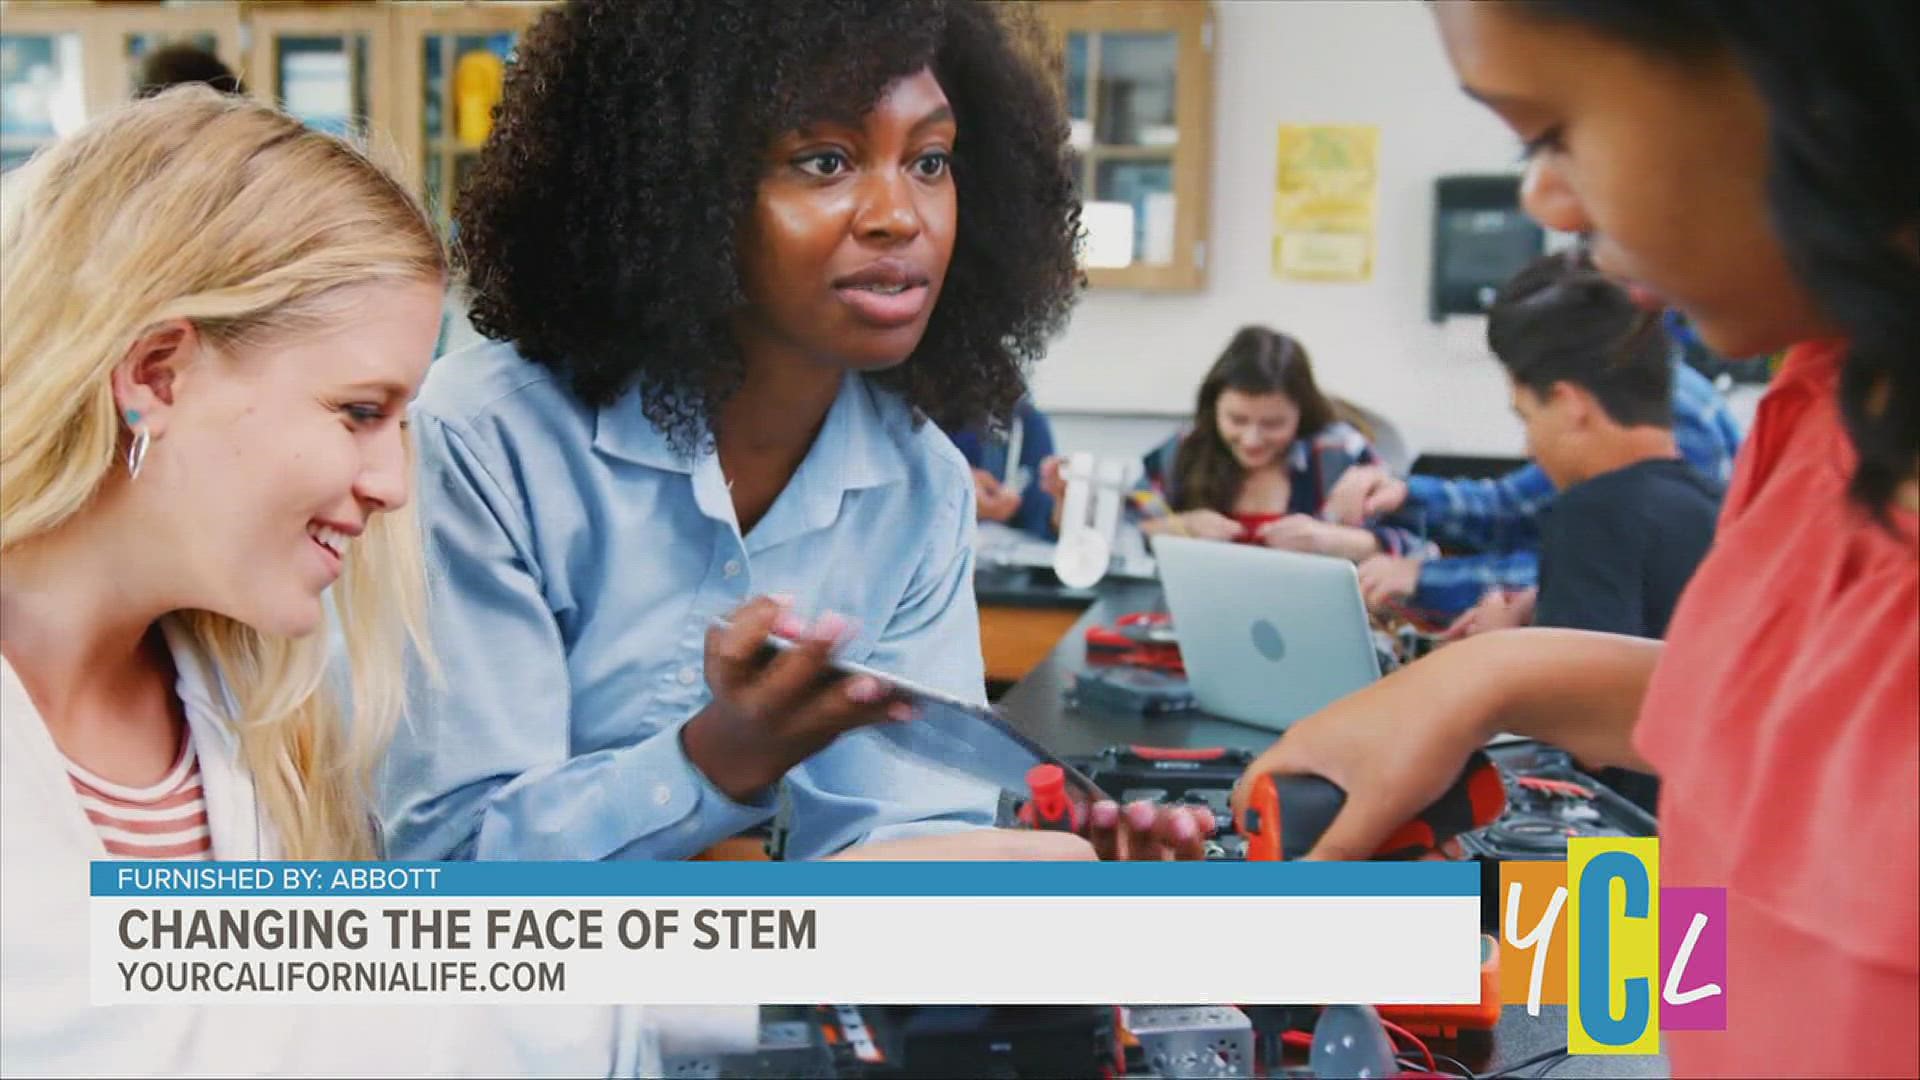 Women are nearly half of the U.S. workforce but hold just 27% of jobs in science, technology, engineering and math (STEM). Watch to learn more.